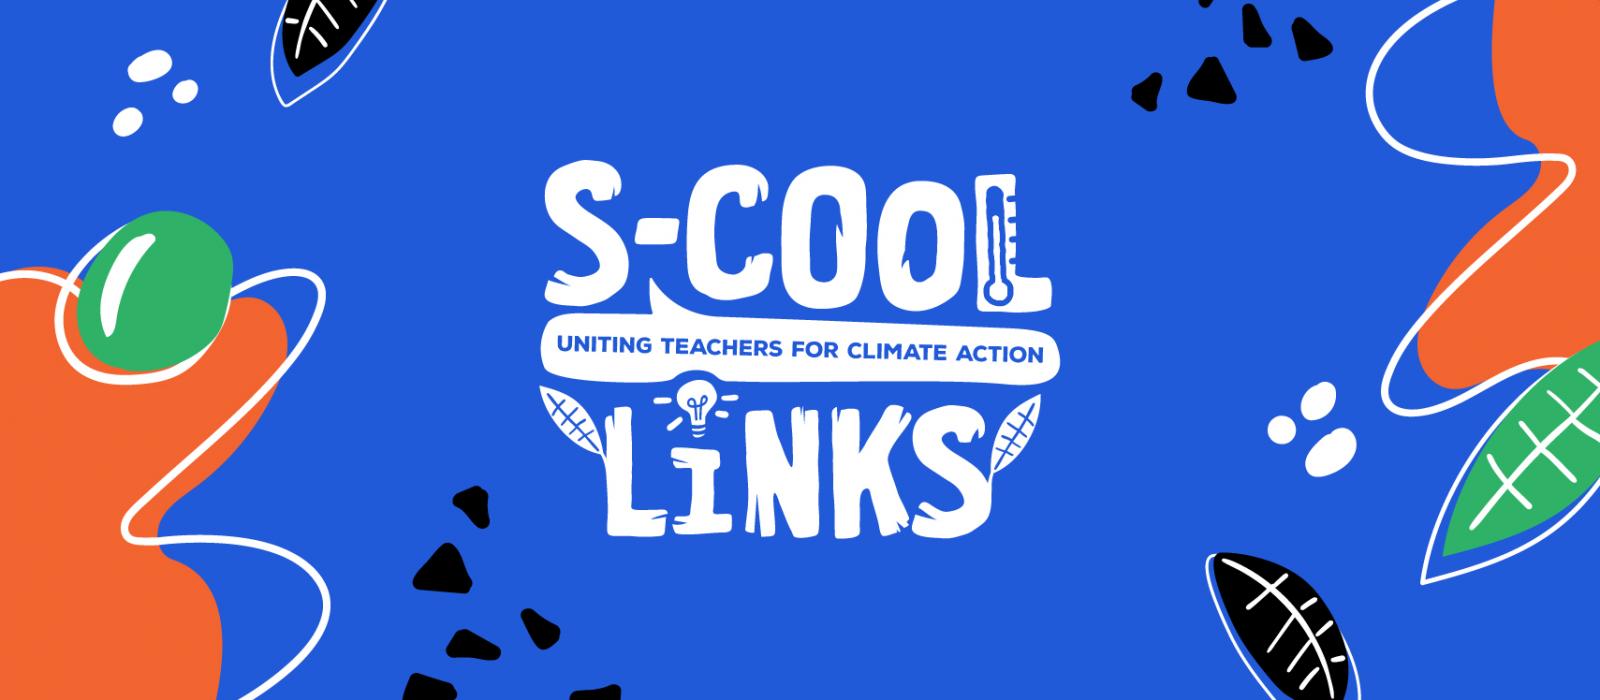 S-Cool-Links banner